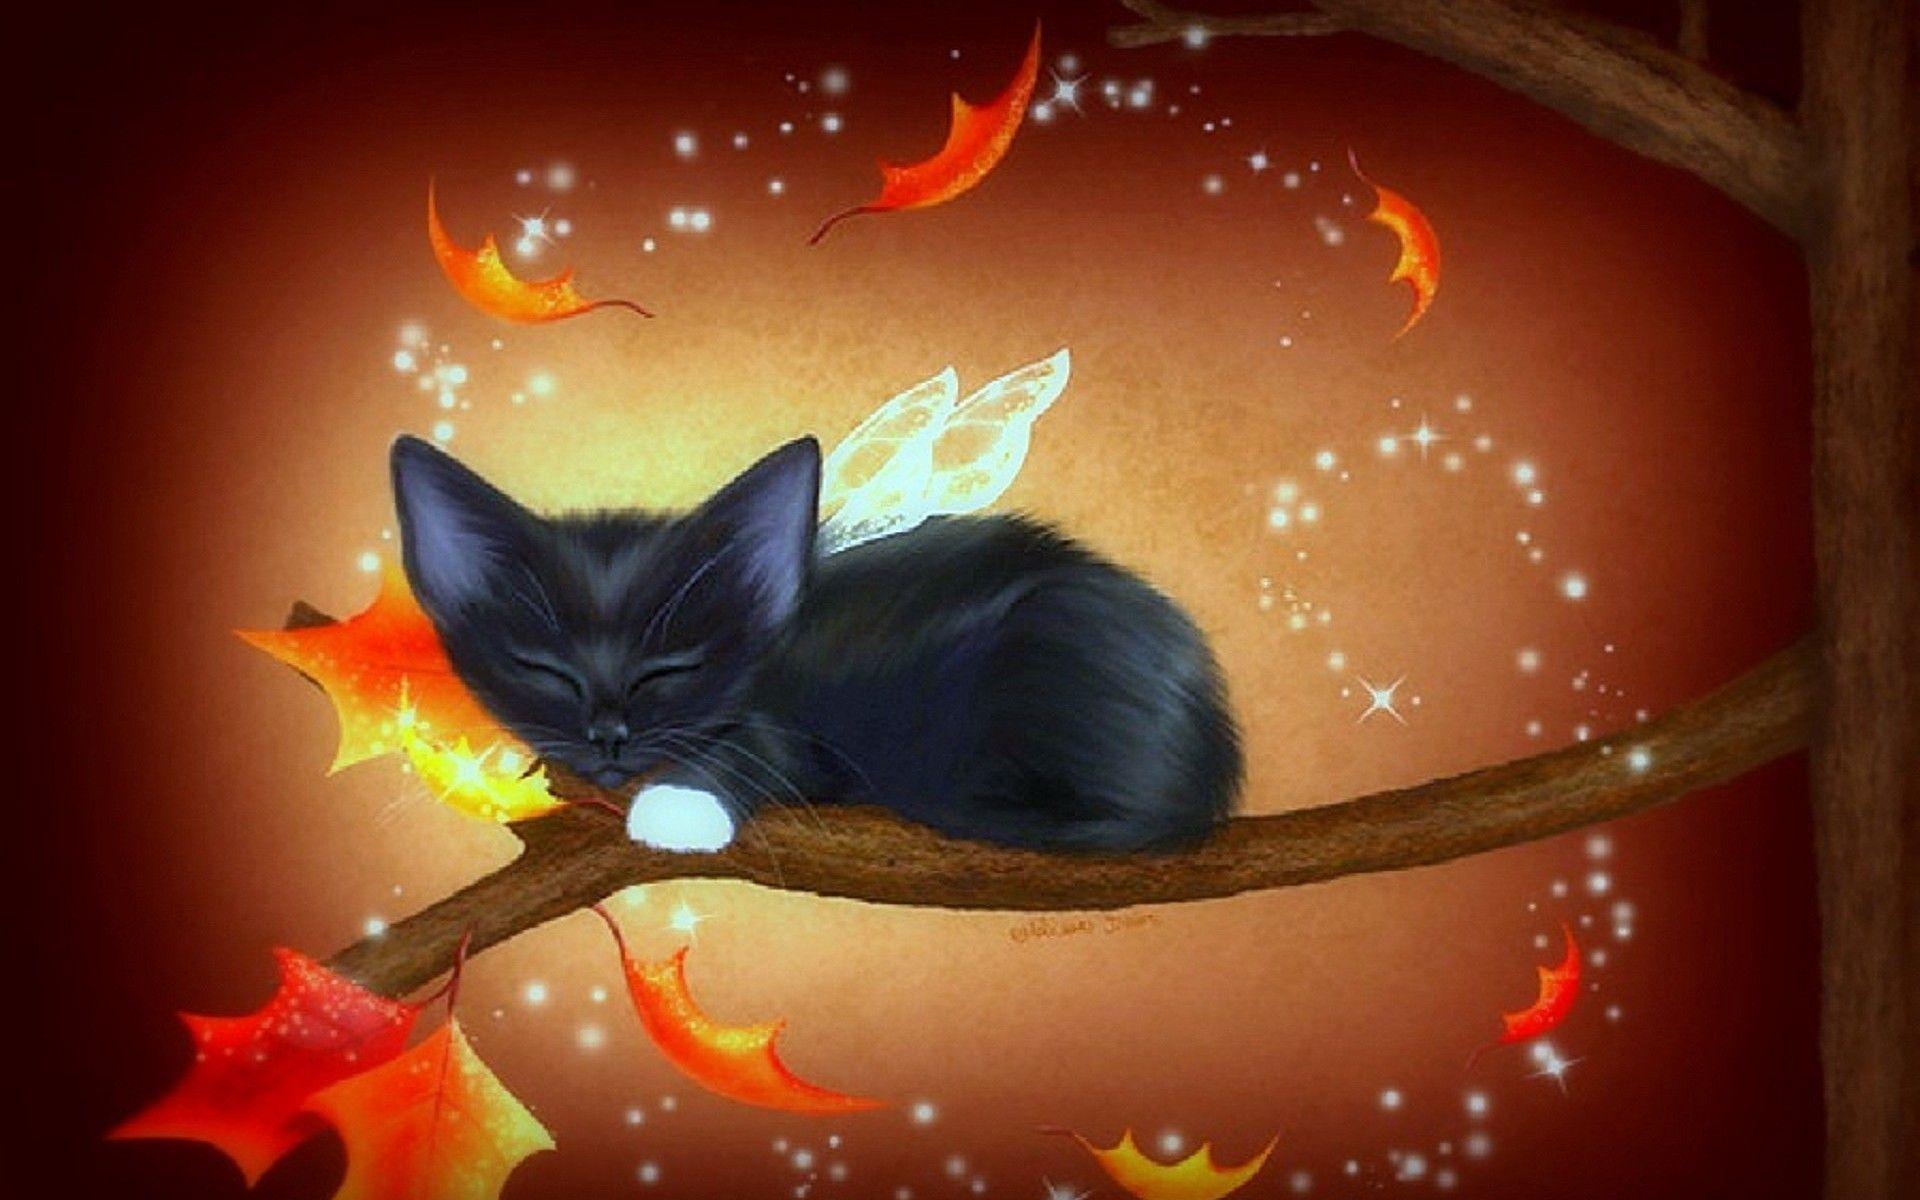 Halloween Black Cat Moonlight Beautiful Background Wallpaper Image For Free  Download  Pngtree